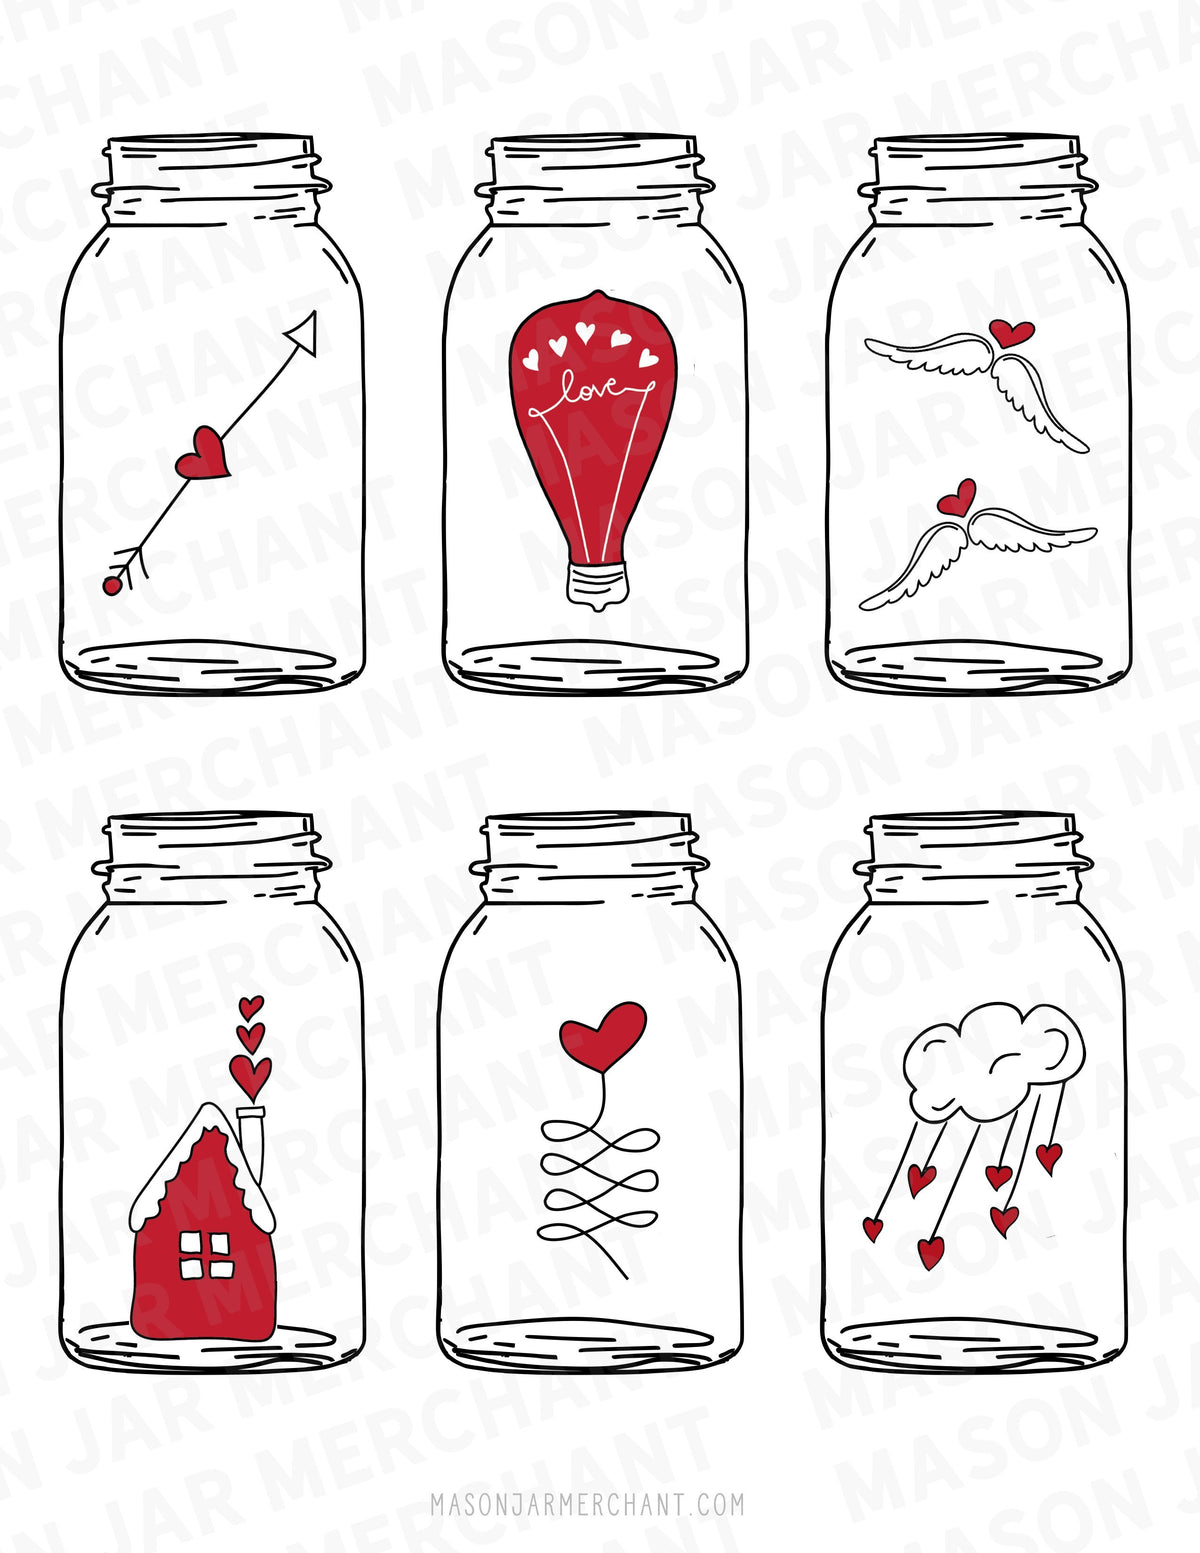 mason jar shaped valentines SVG download and use as gift tags